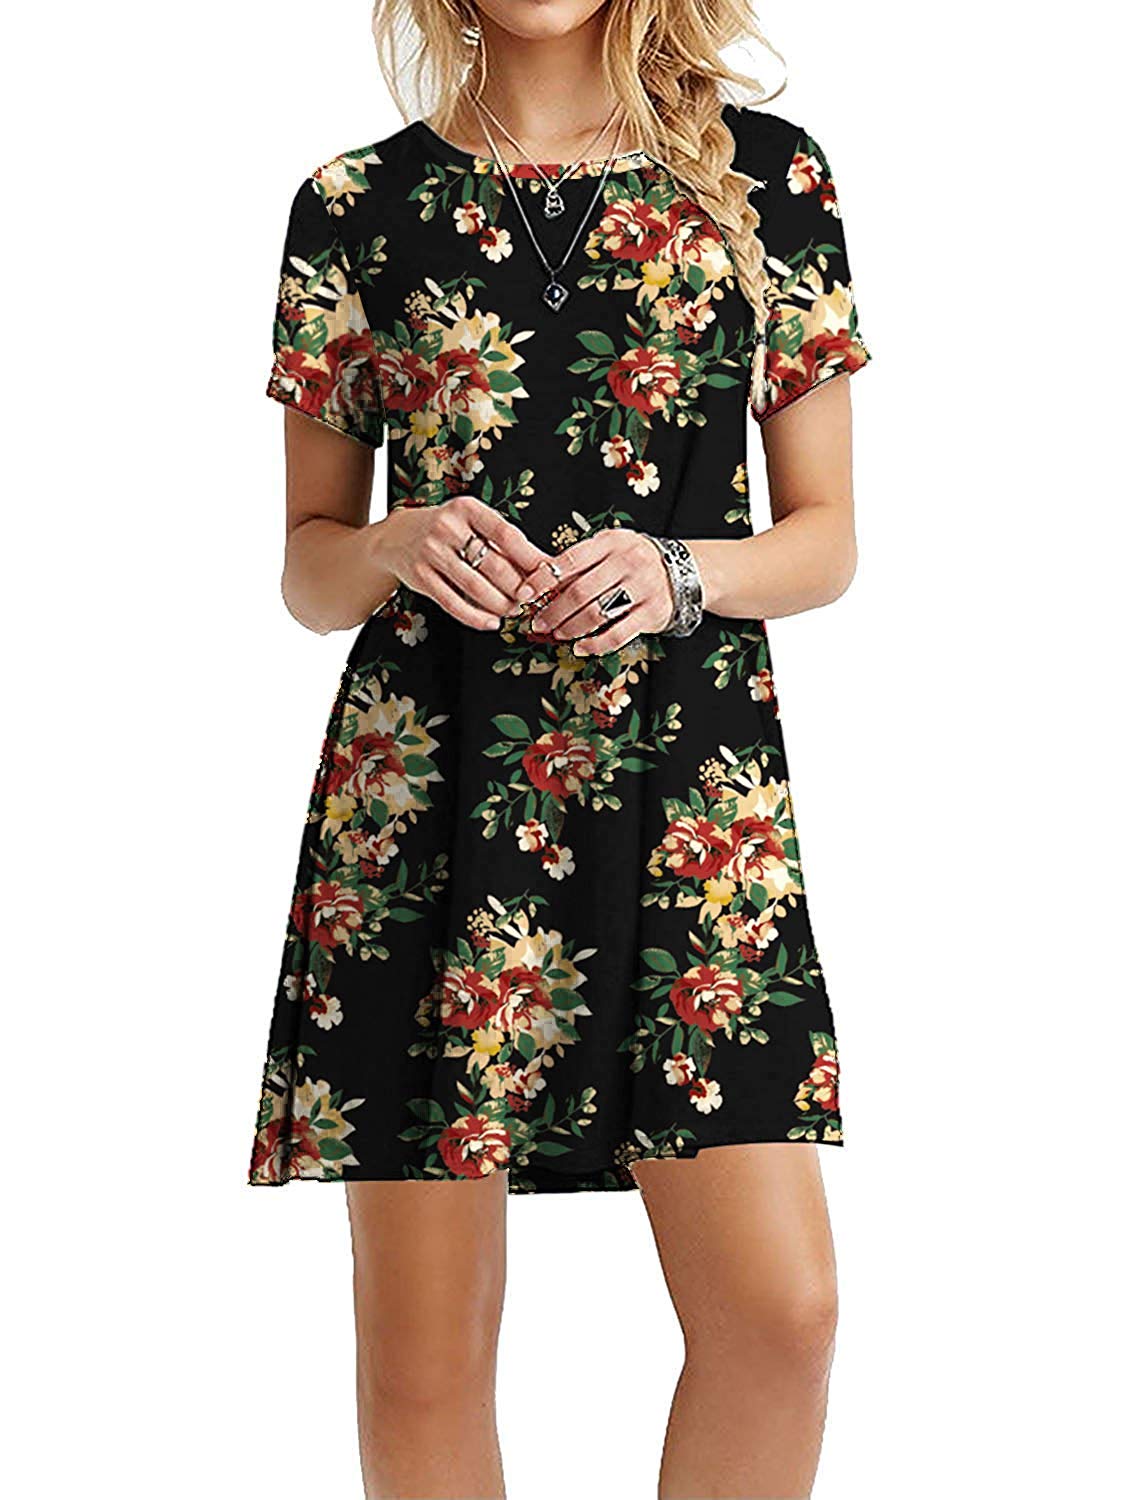 casual floral print dress for women - loose fit soft stretchy summer wear